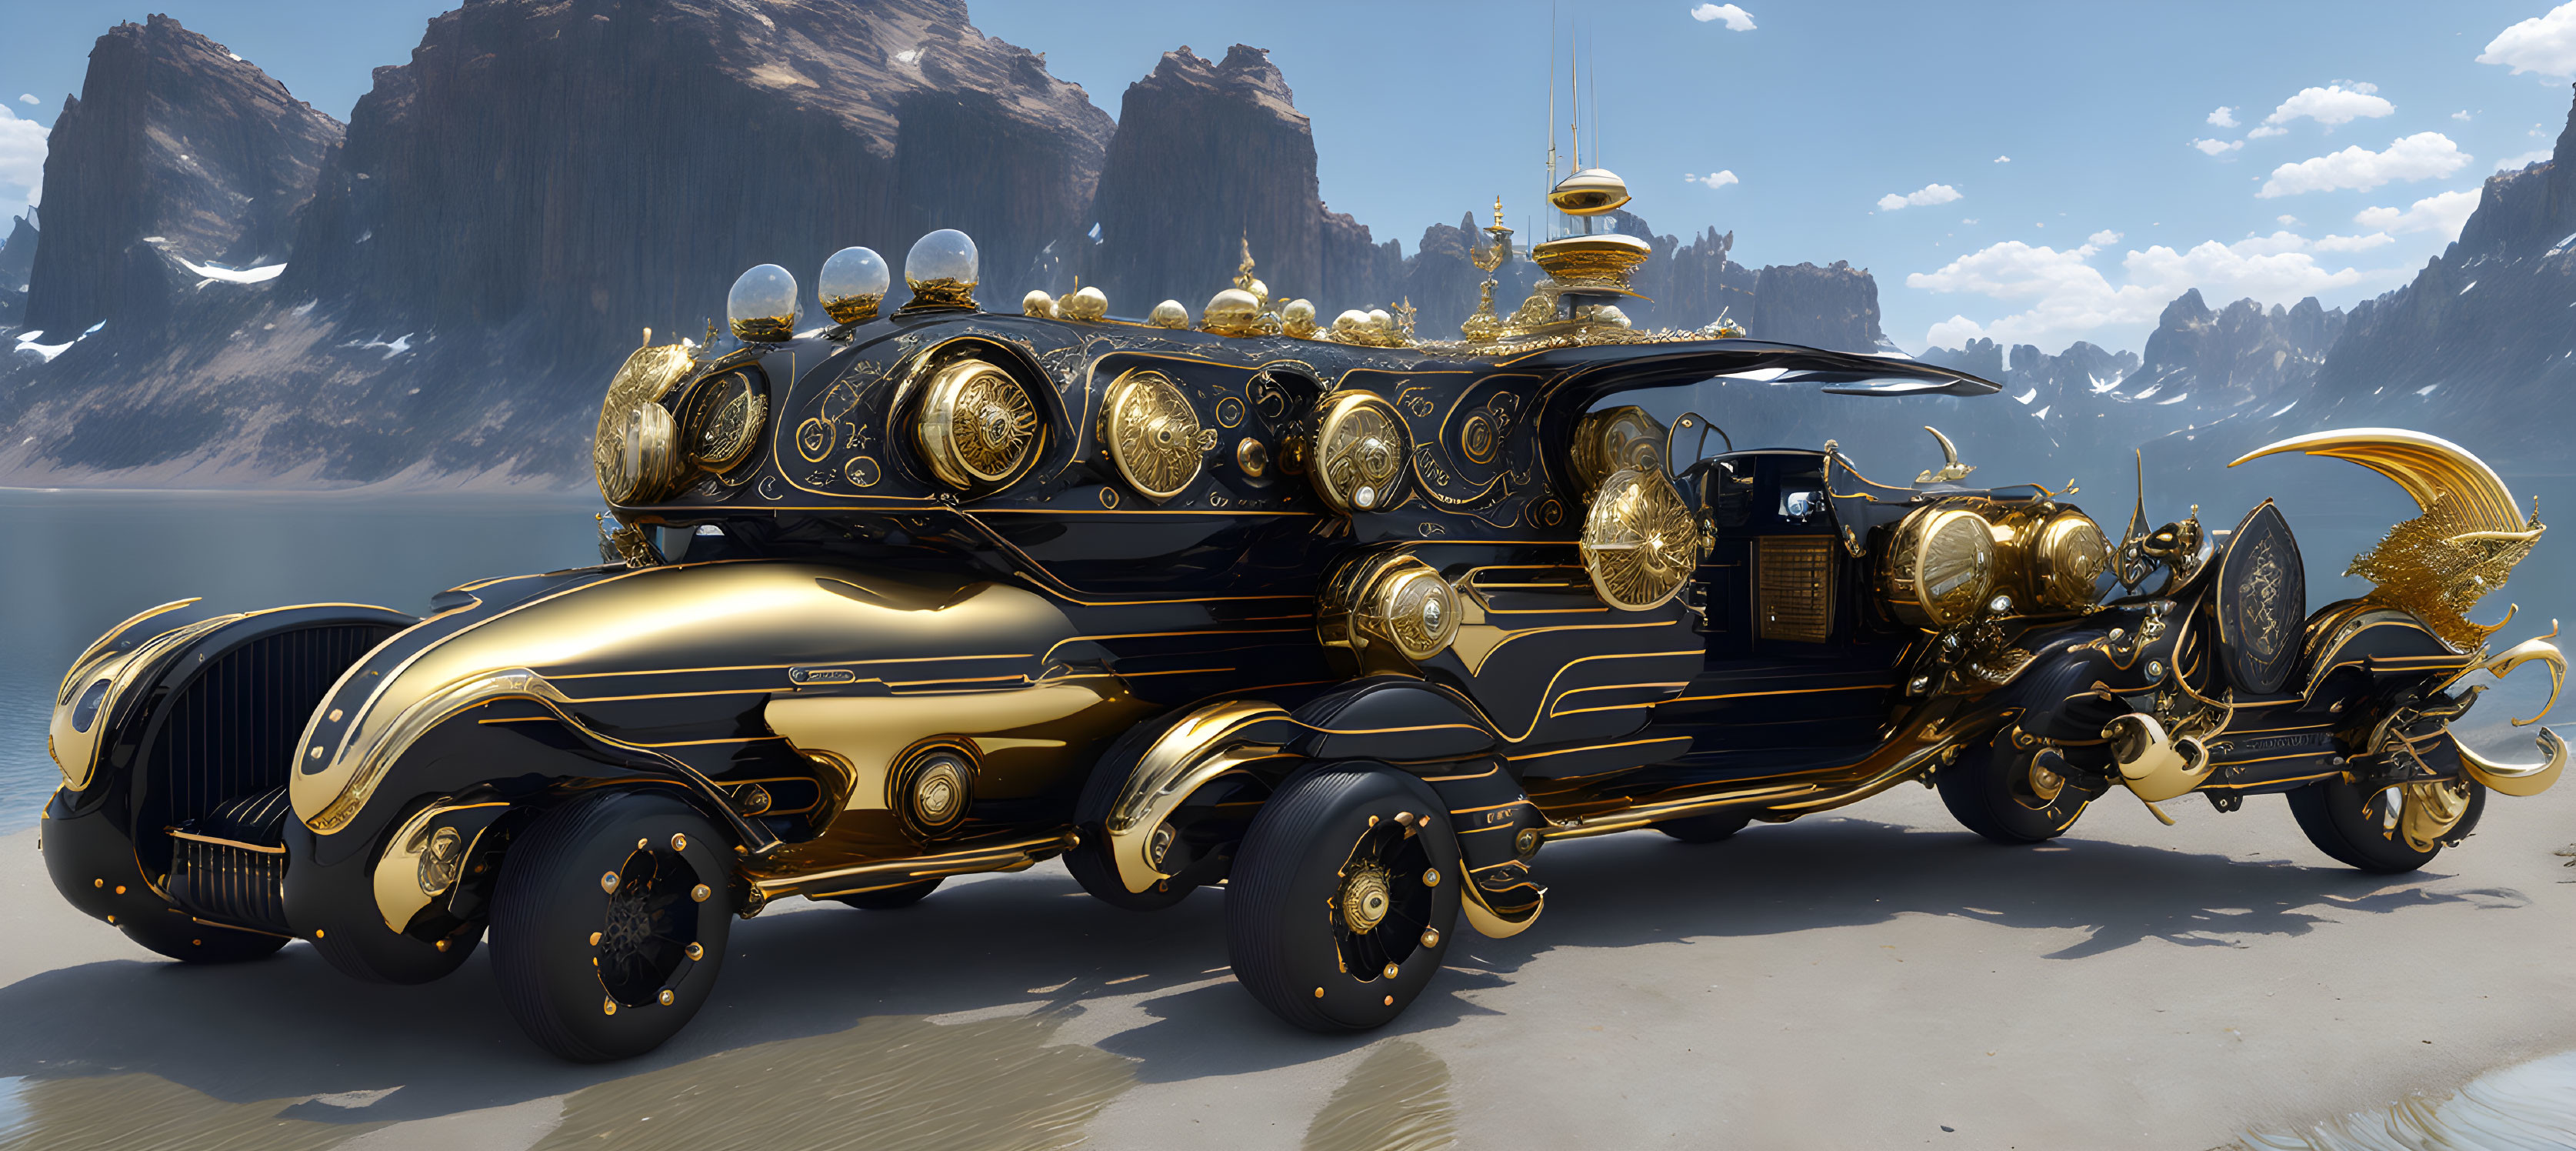 Steampunk-inspired gold and black vehicle in mountain landscape